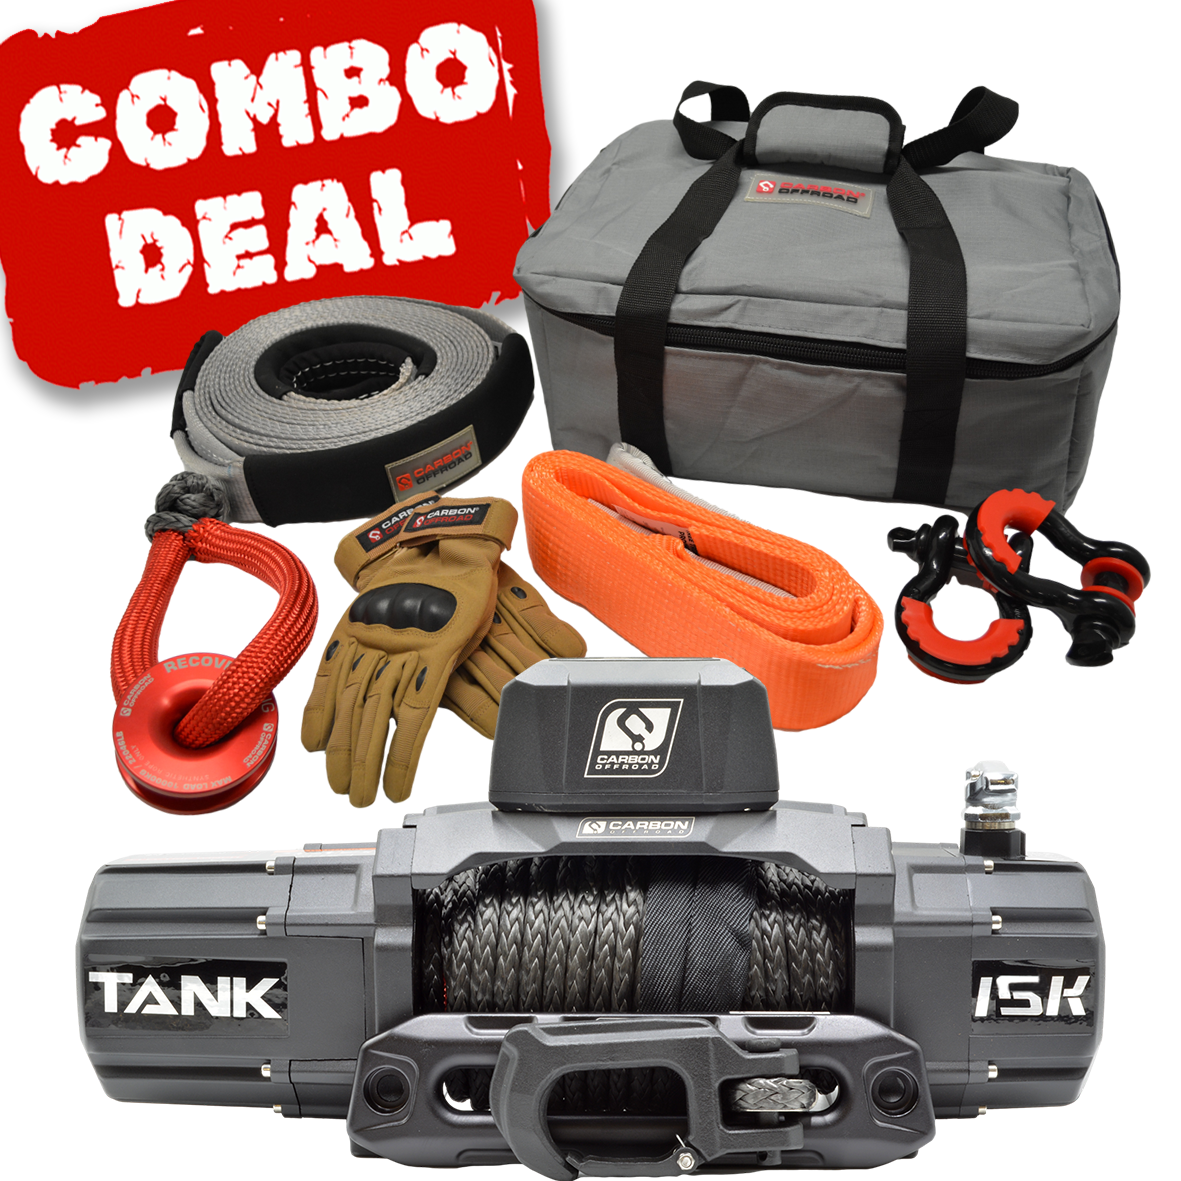 Carbon Tank 15000lb 4x4 Winch Kit IP68 12V and Recovery Combo Deal